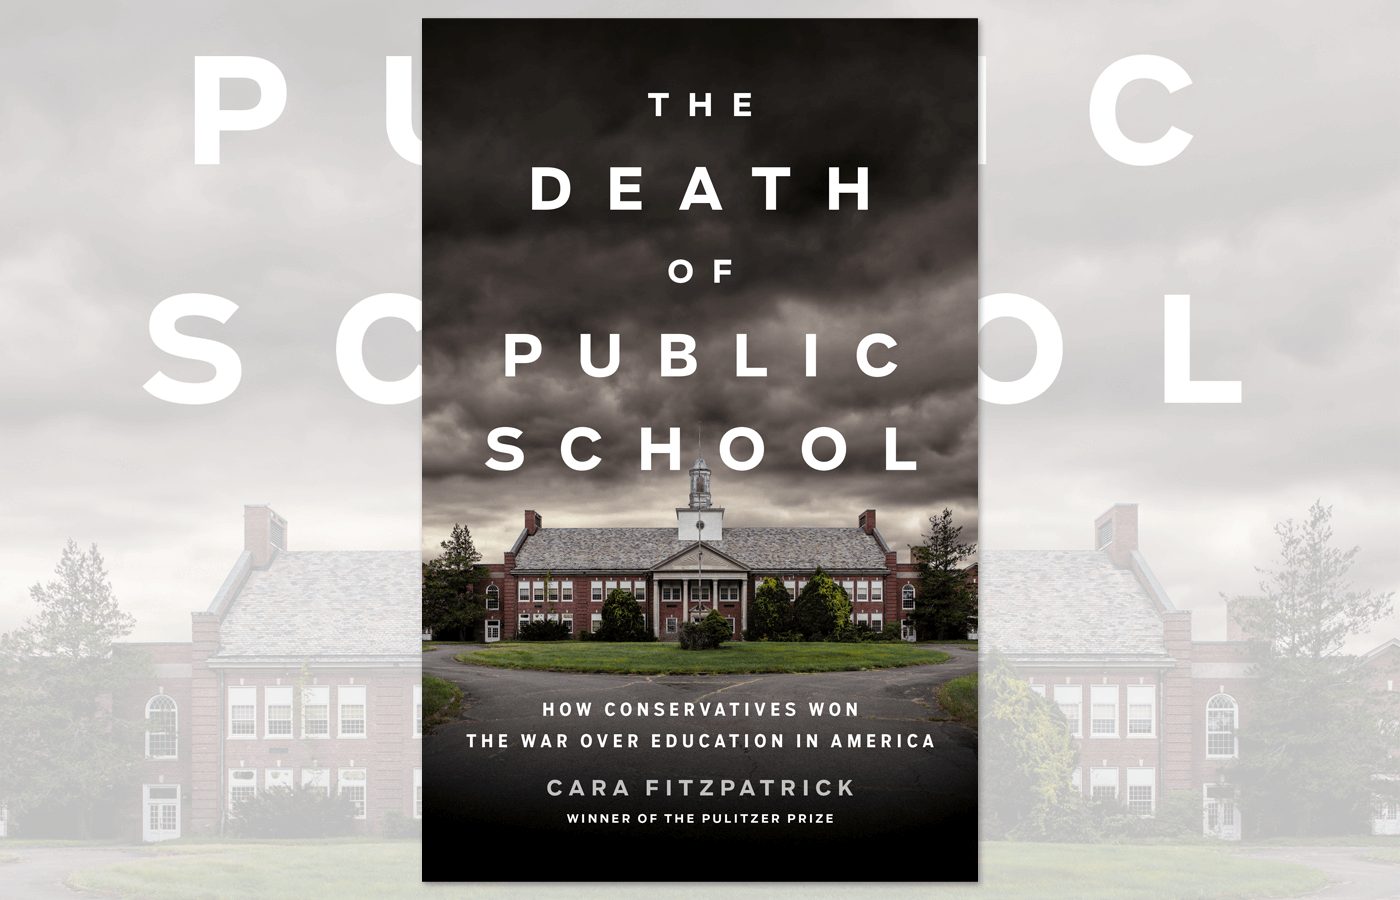 Book cover of "The Death of Public School" by Cara Fitzpatrick